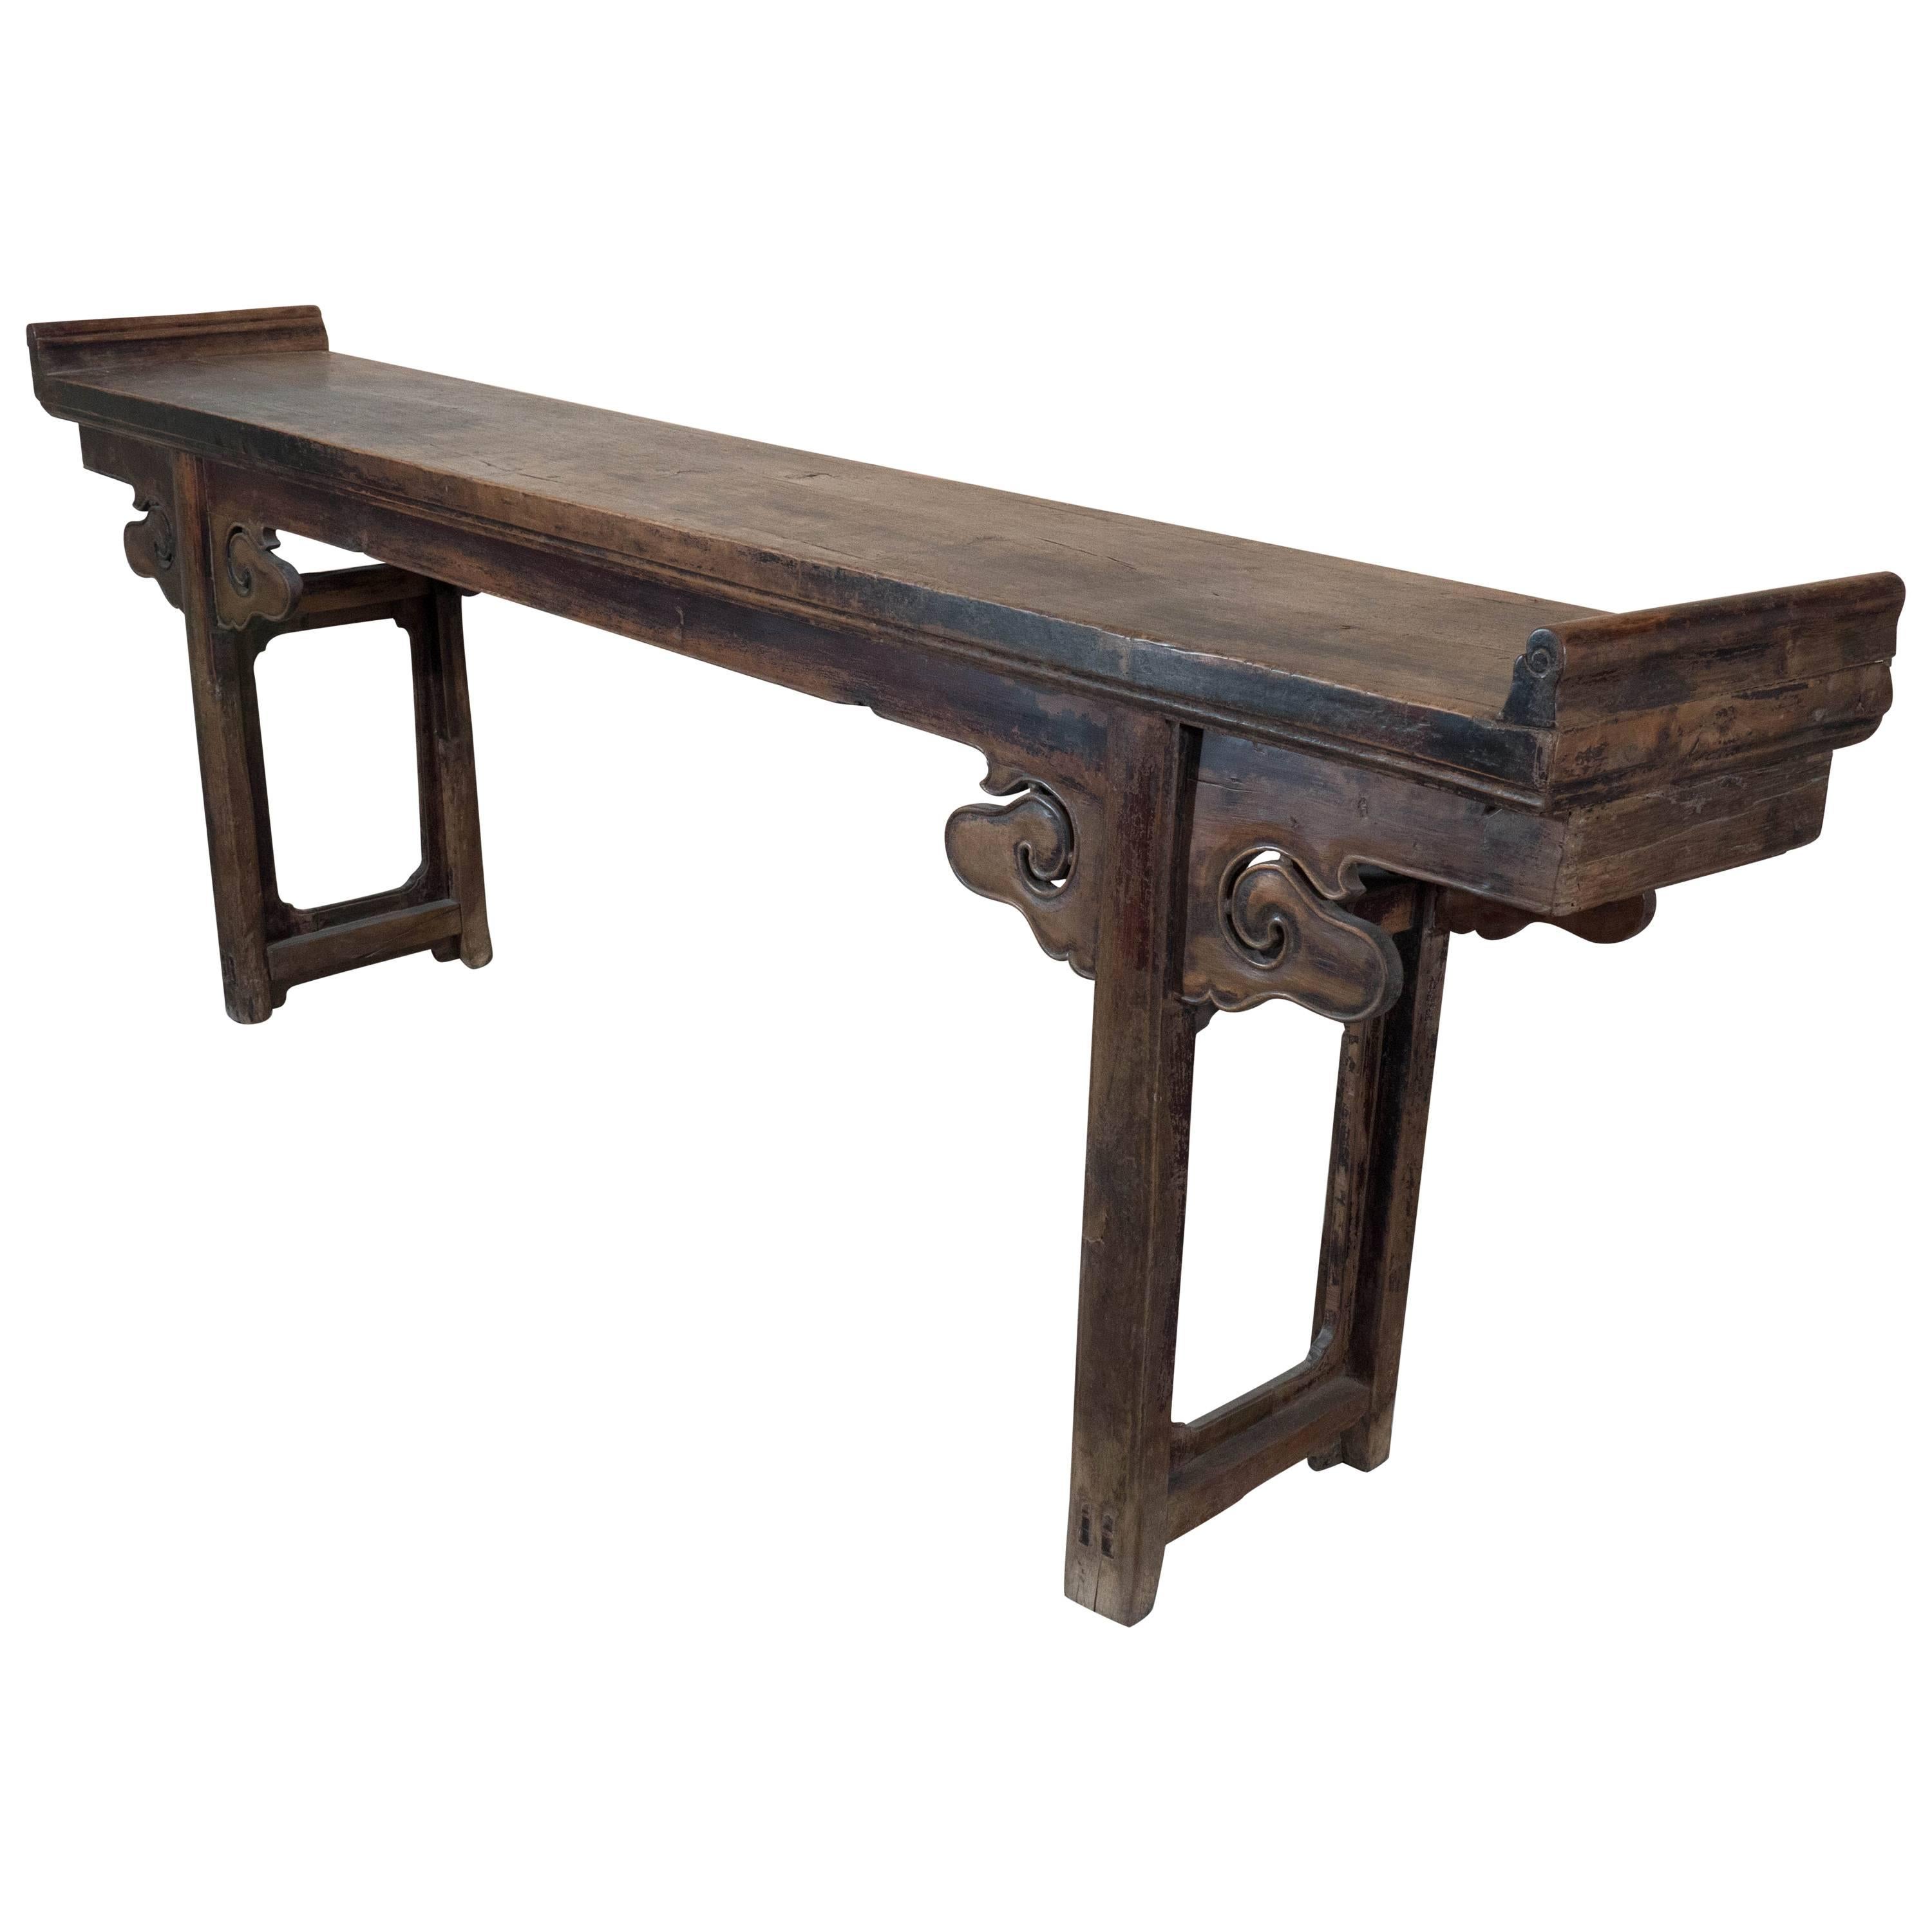 18th Century Chinese Walnut Altar Table